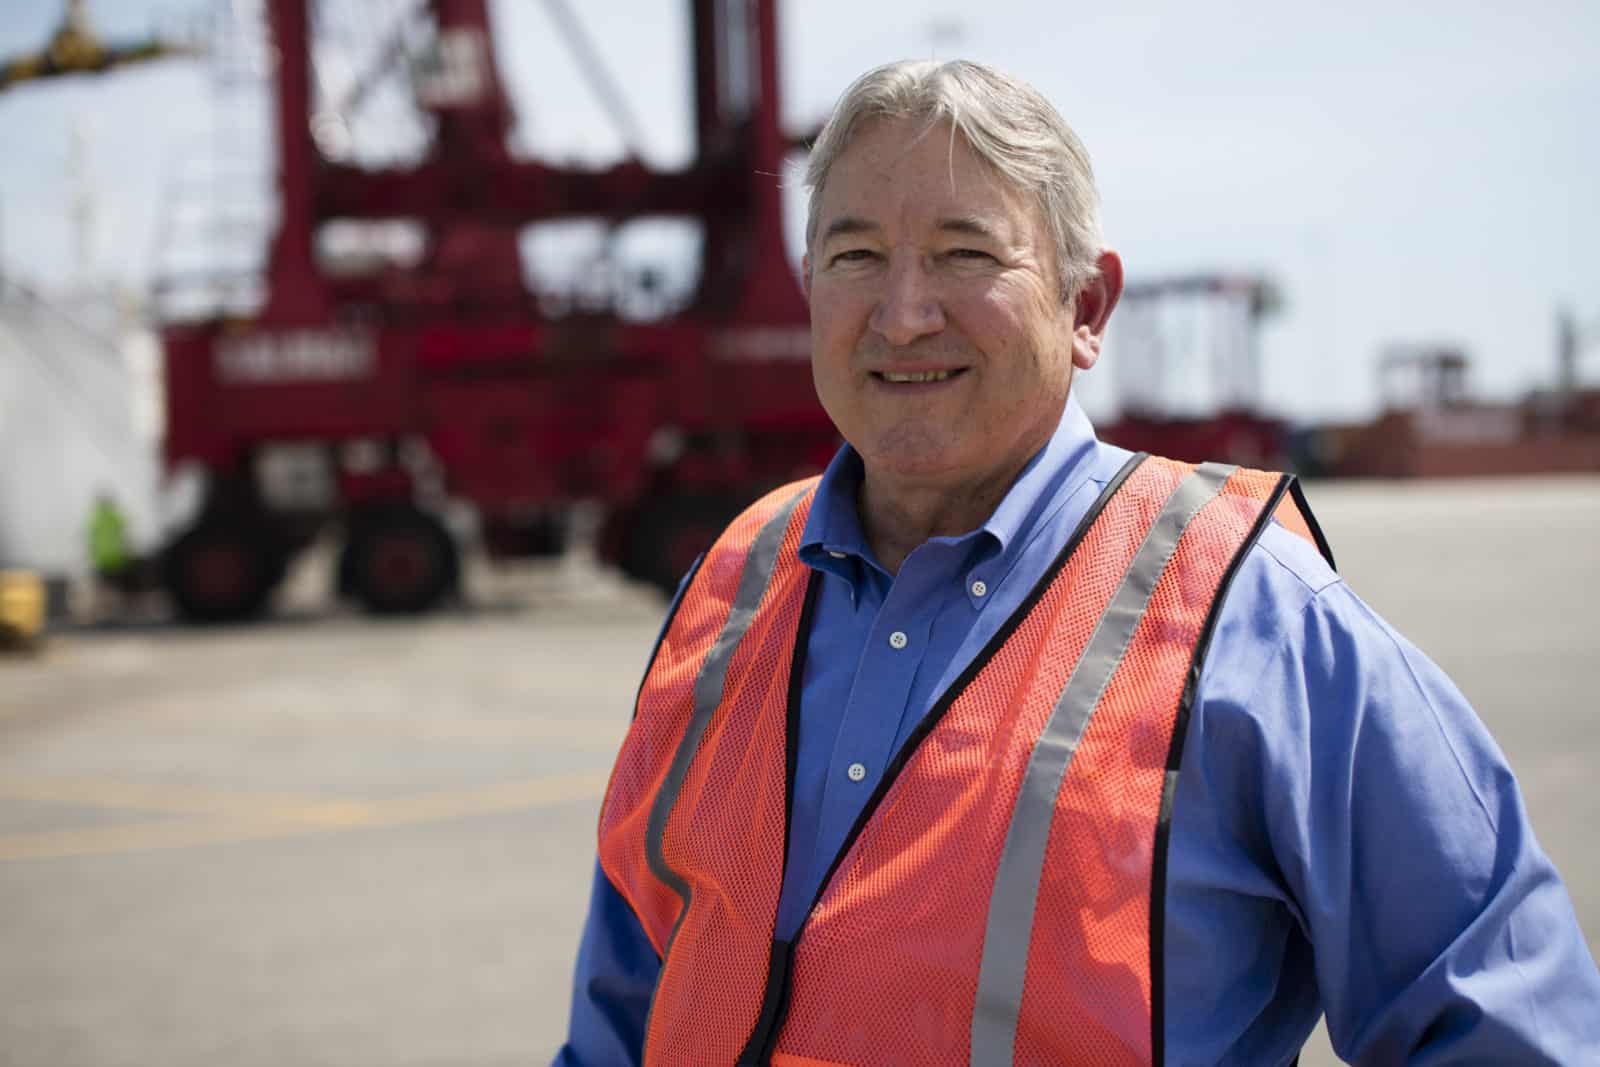 Culpepper poses, in an orange reflective vest, standing in a shipyard.